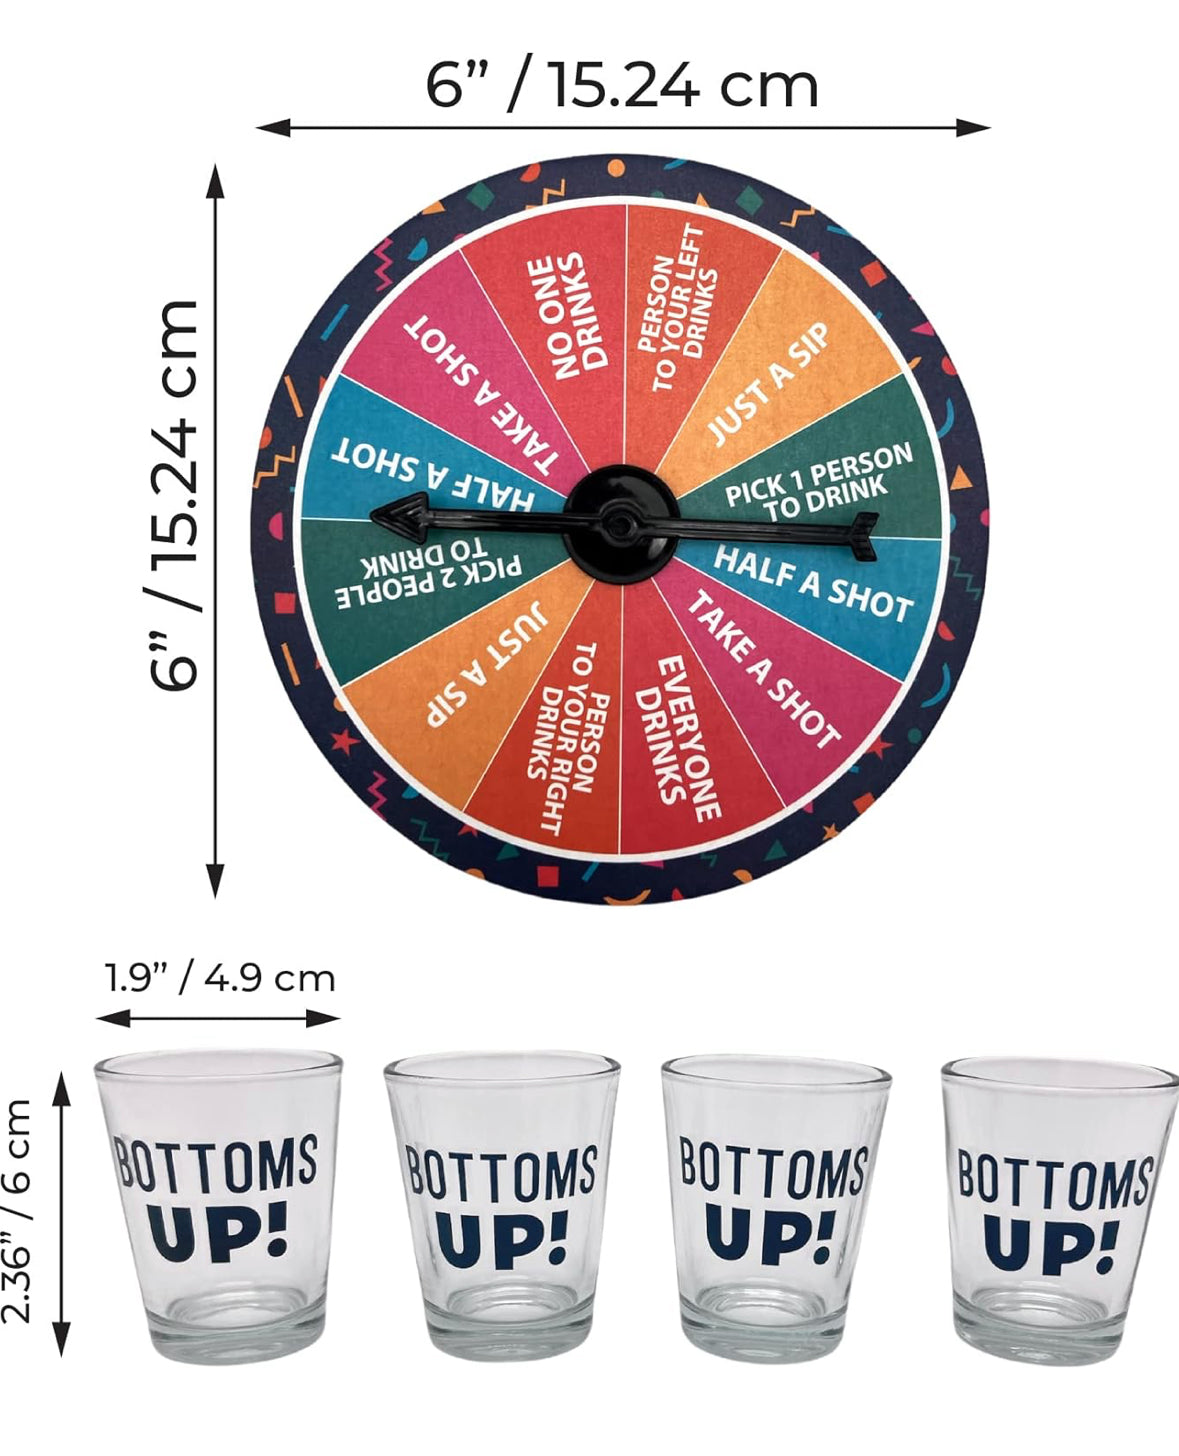 Bottoms Up! Party Spinner Drinking Game